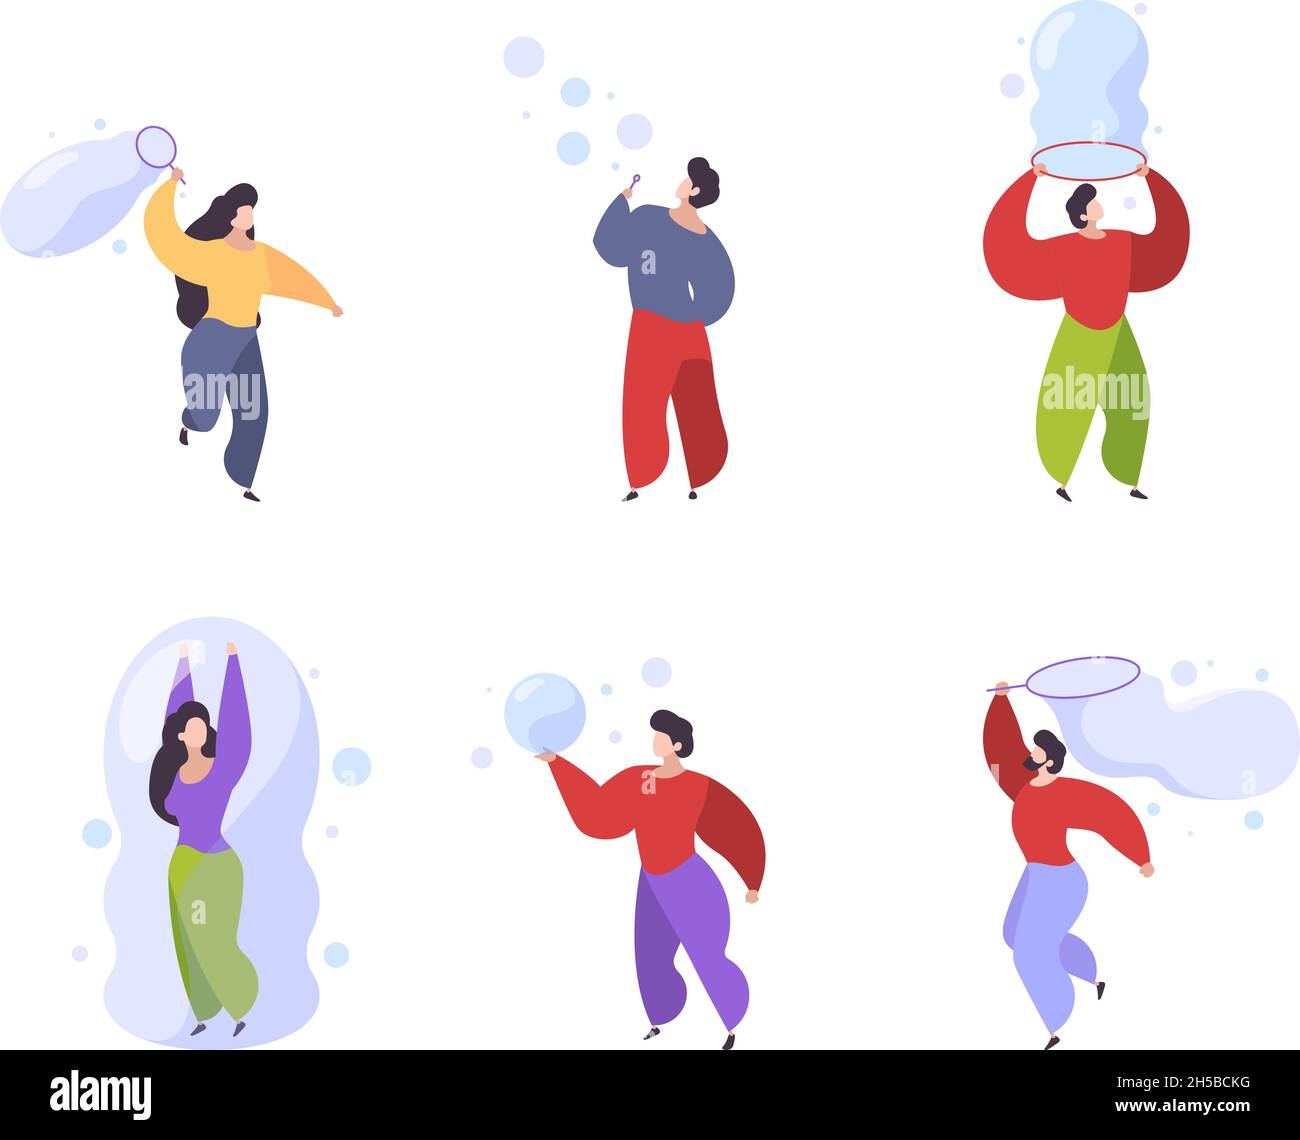 Soap bubbles. Kids active people attractions playing with soap bubbles garish vector illustrations collection various characters male and female Stock Vector